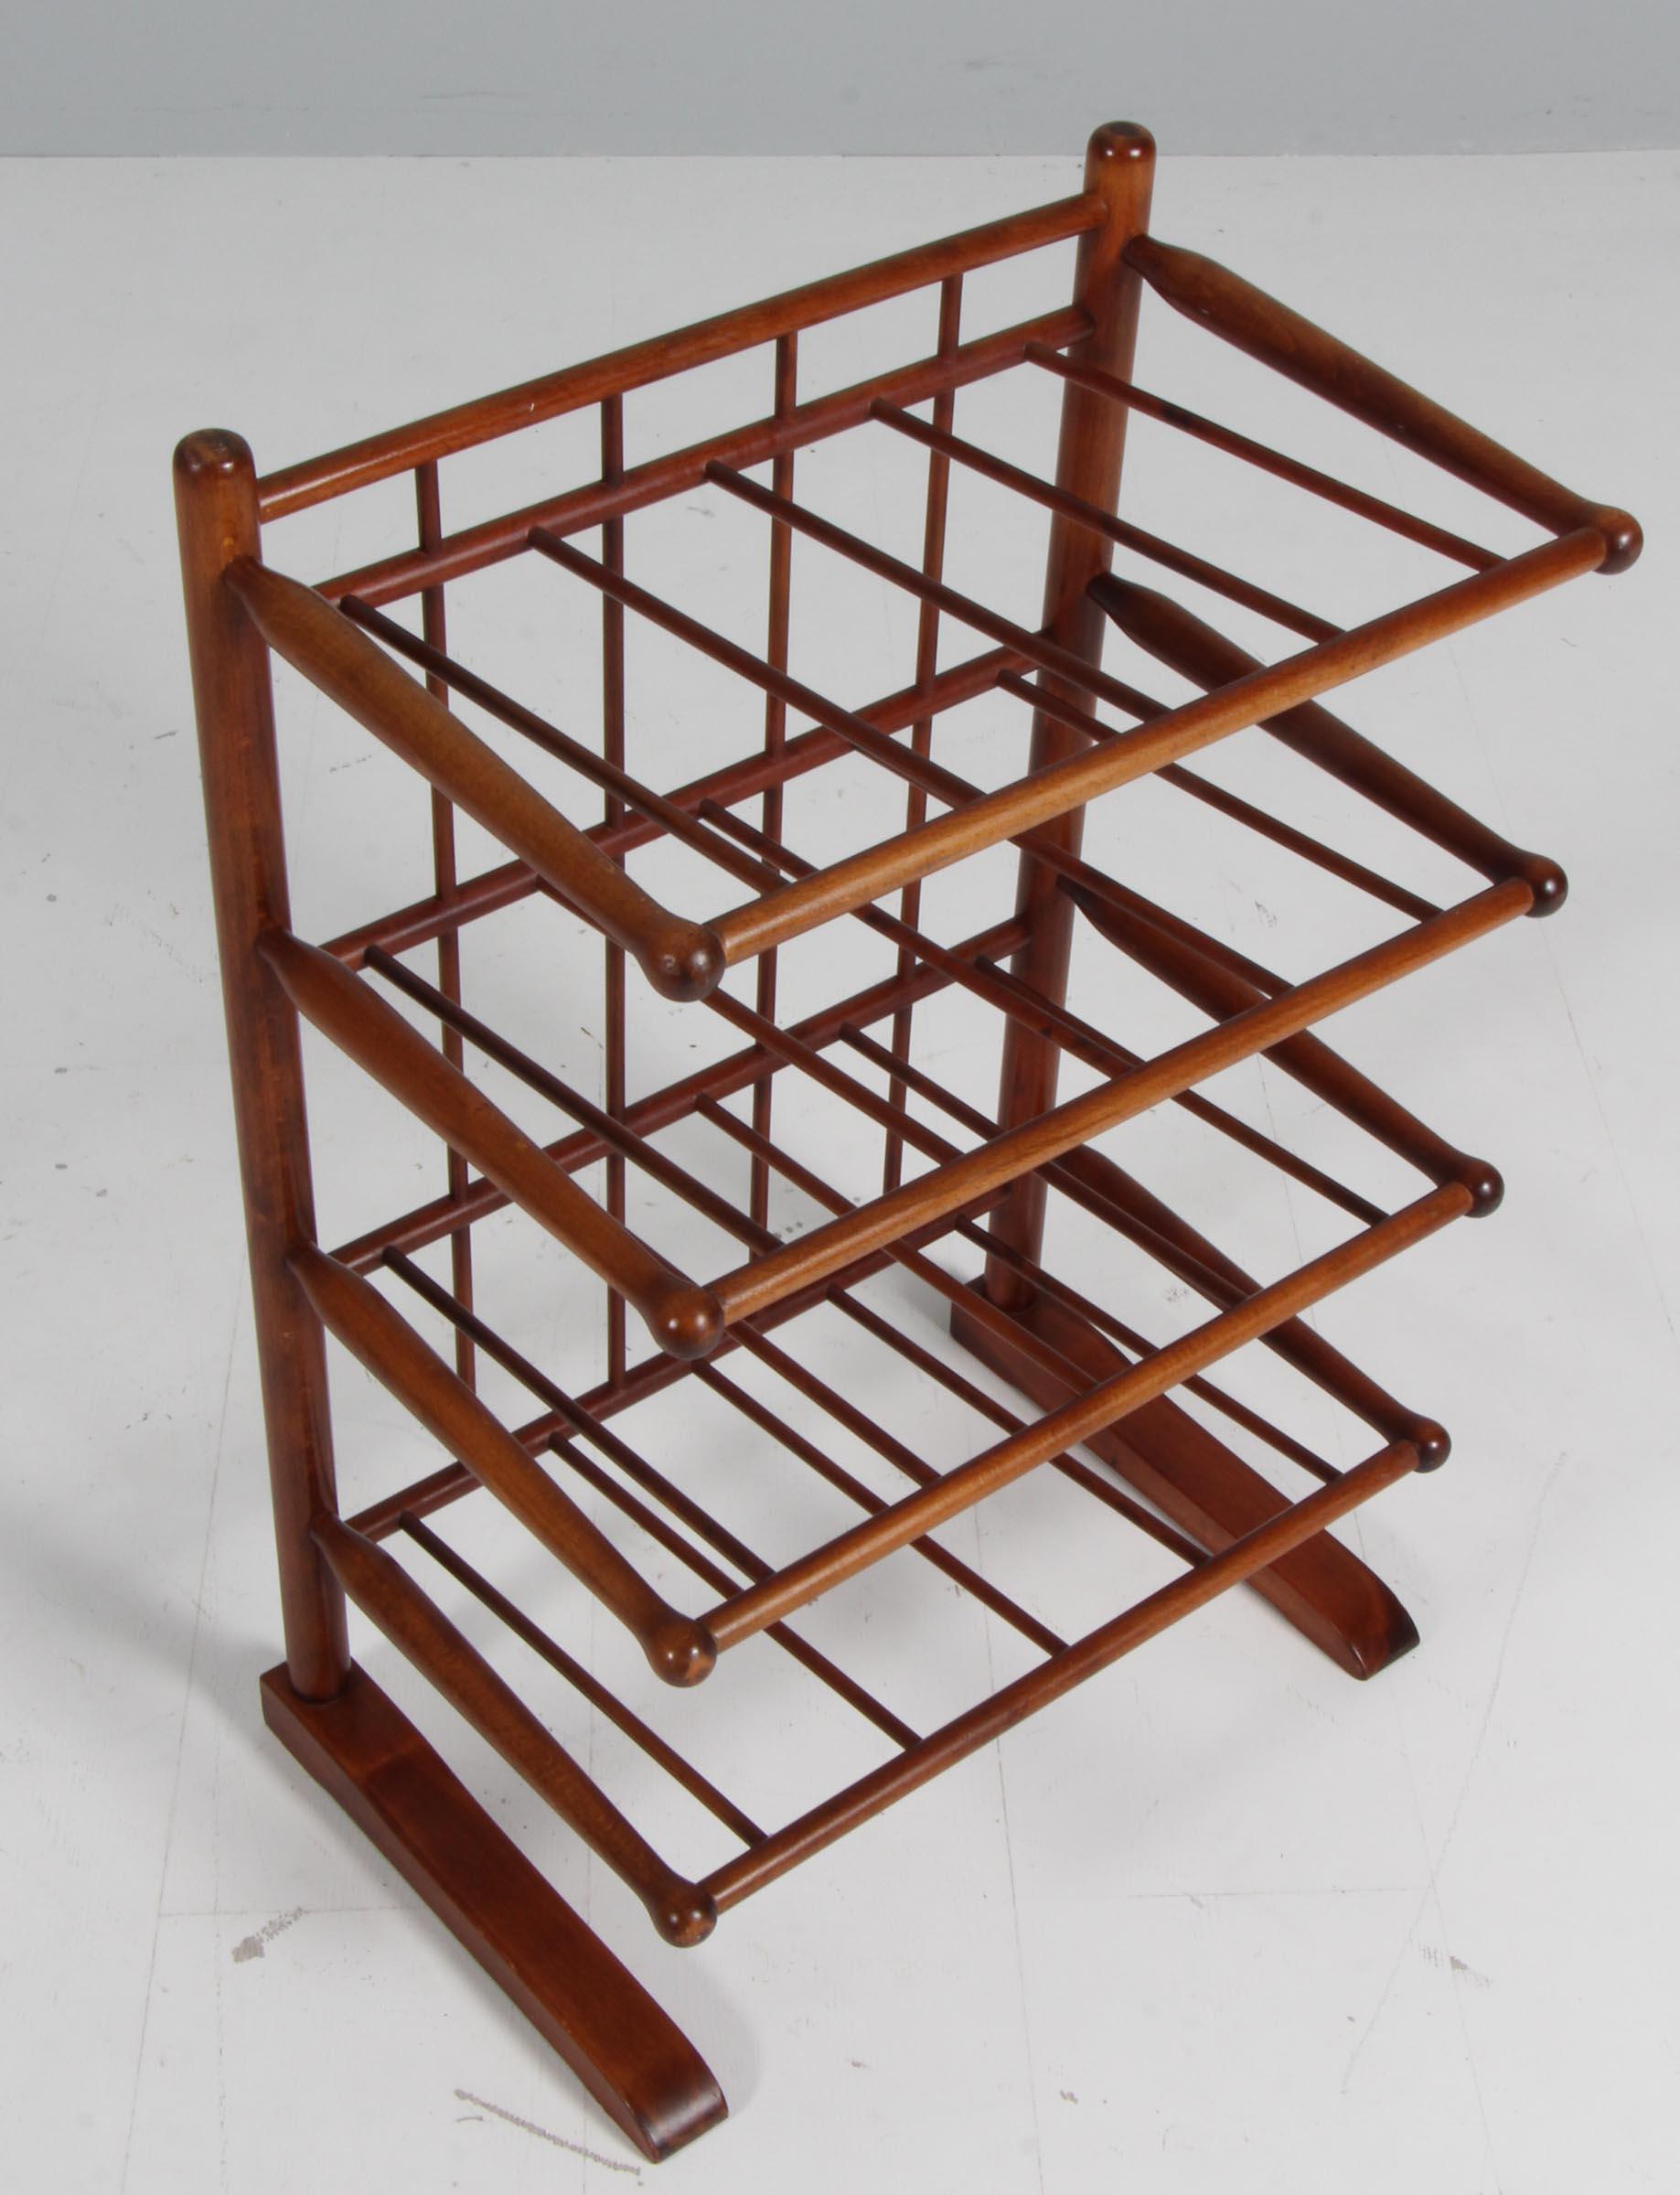 Magazine or shoe rack designed by Frits Henningsen and manufactured by Andreas Tuck in Denmark during the 1940s. The solid mahogany frame features Drumstick detailing and bend/shaped wood detailing.

